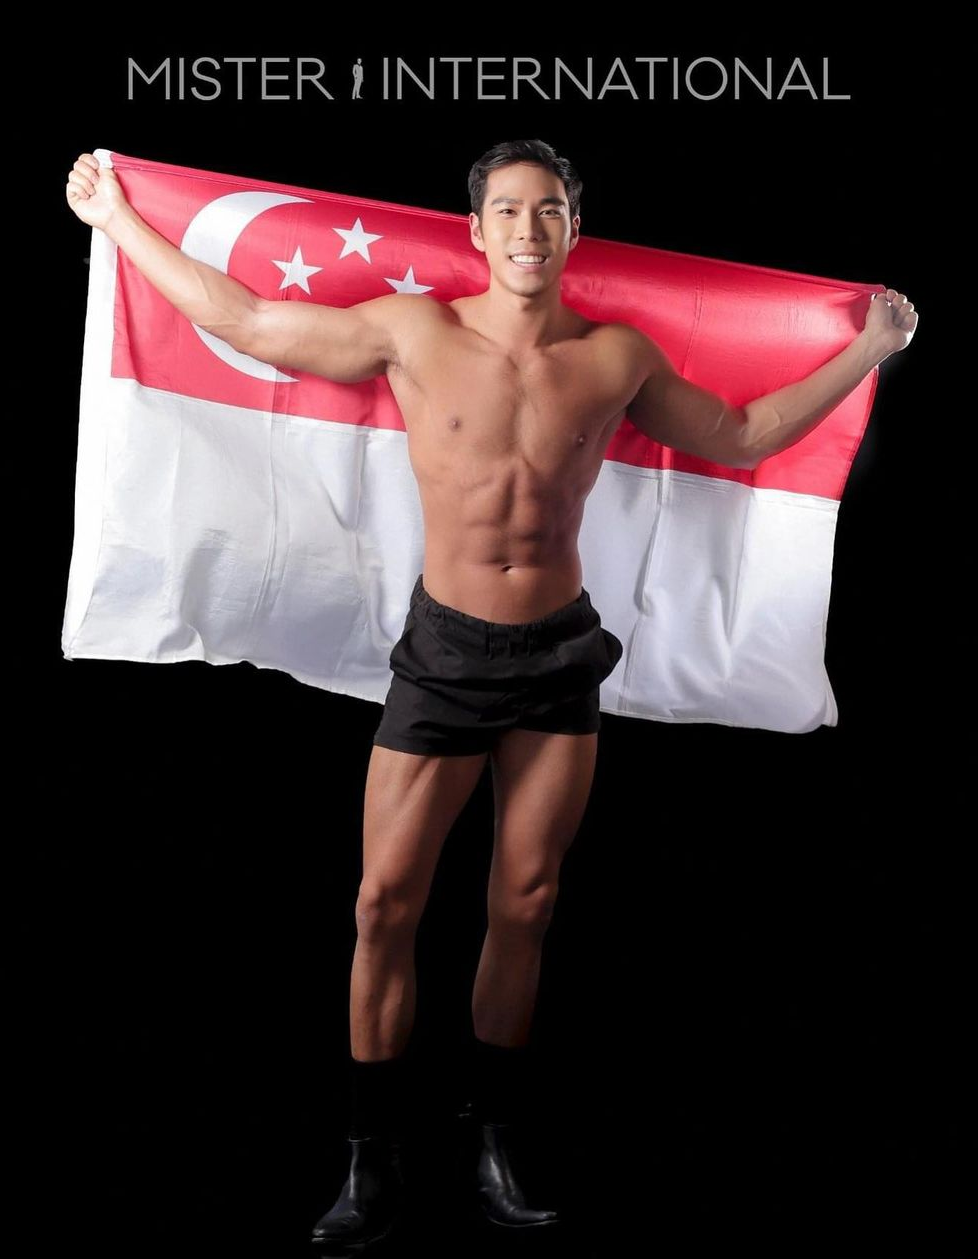 Mister International Singapore PT Shorts and Boots Costume 